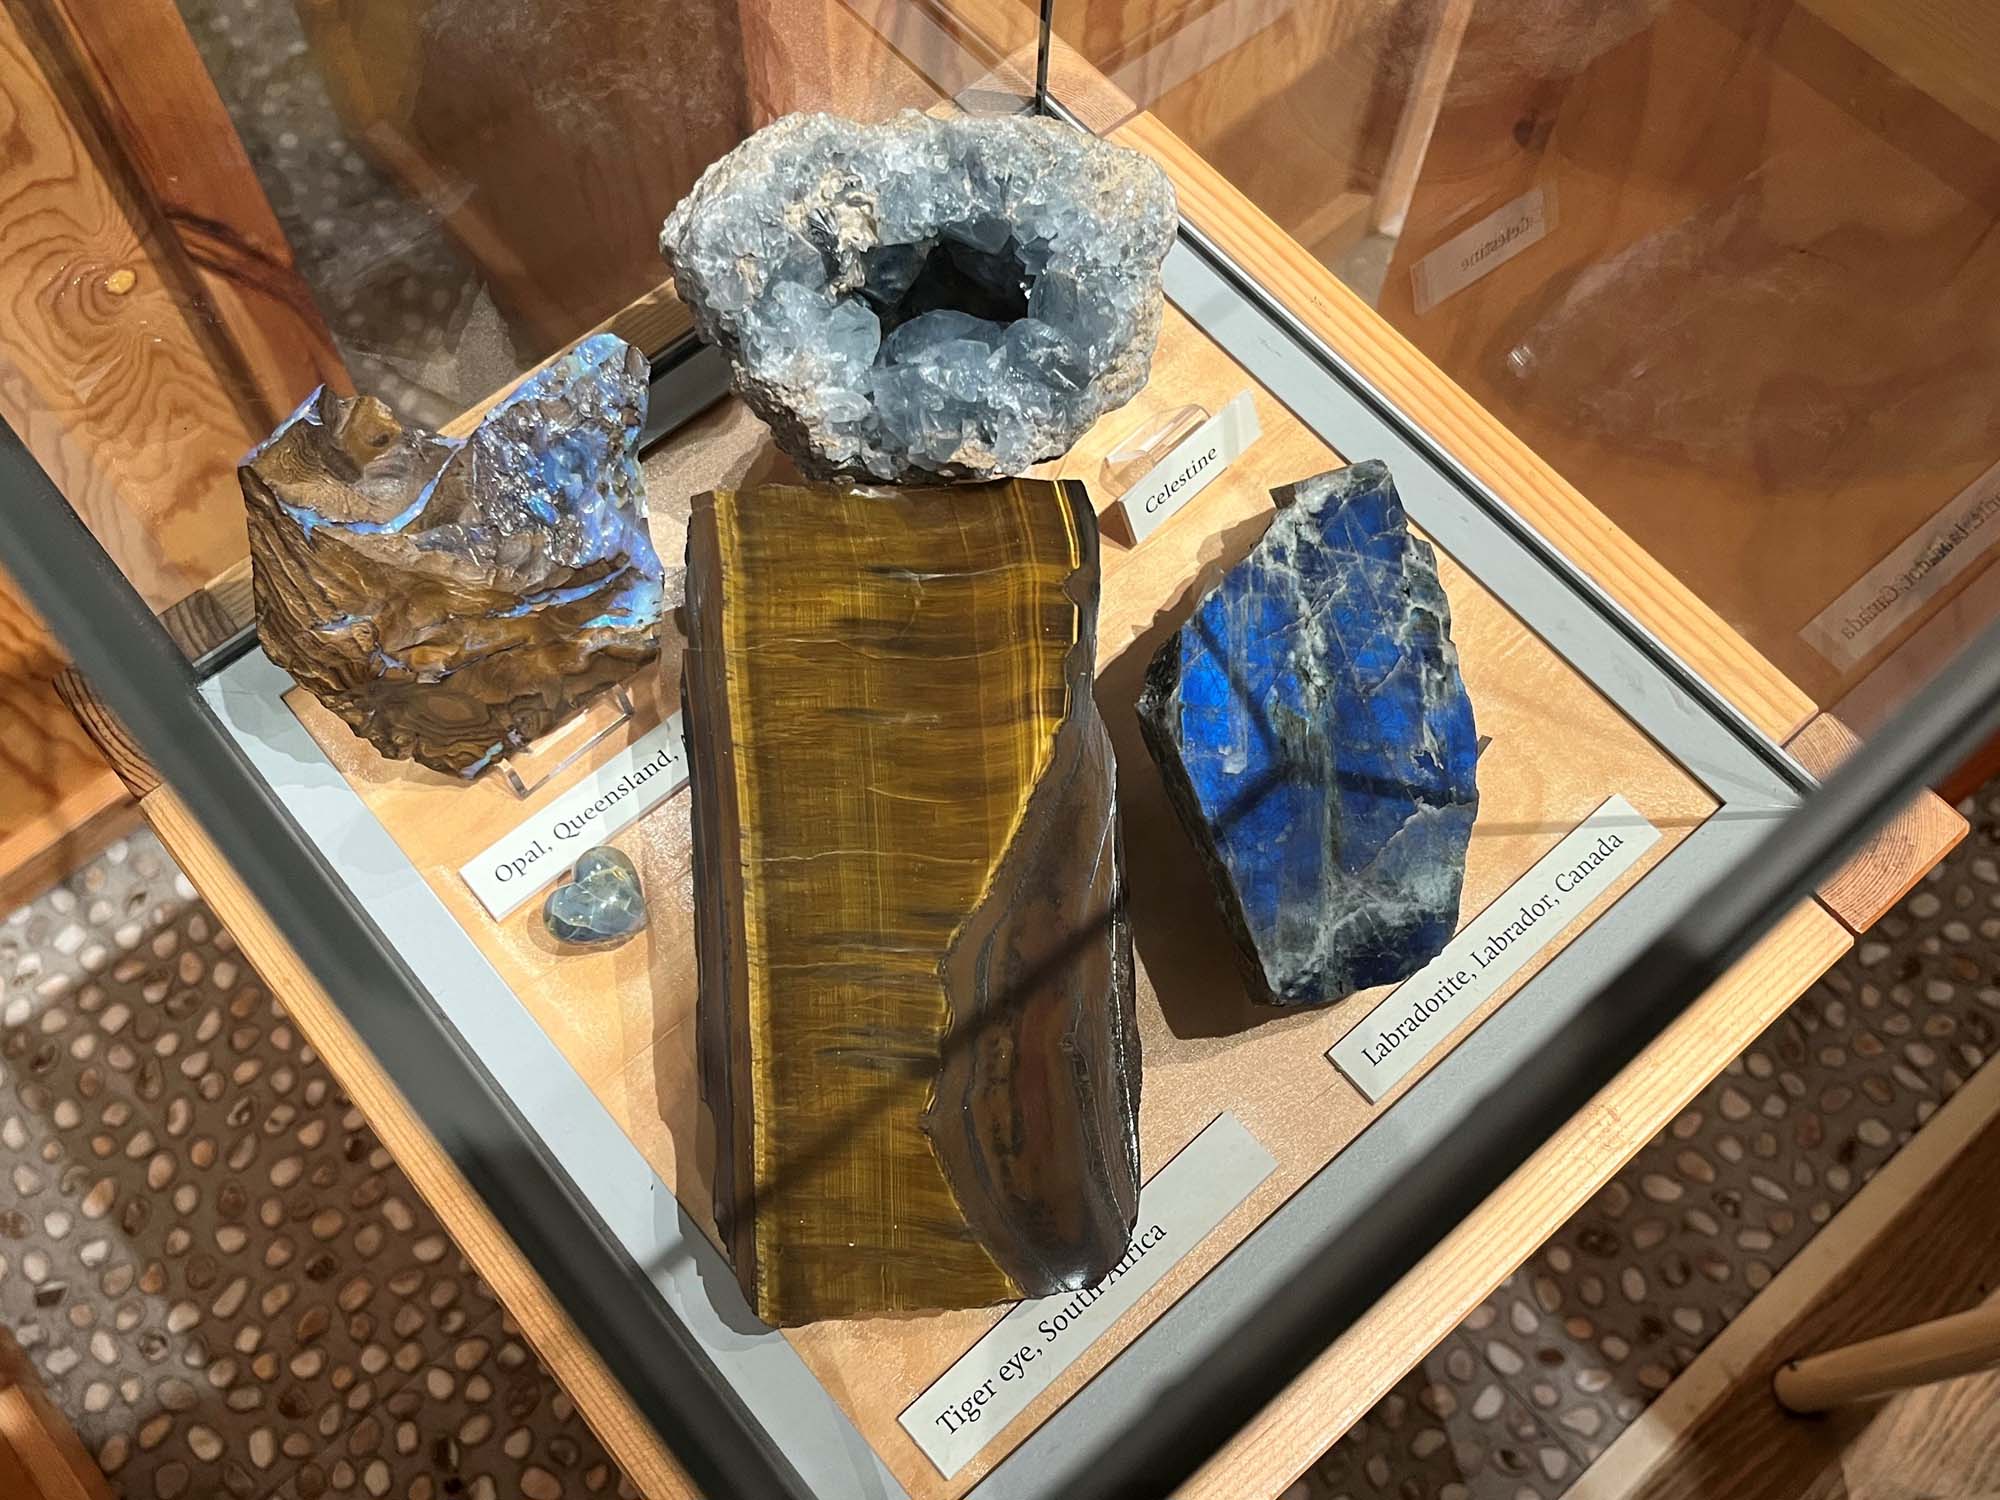 The geology collection of minerals on display at the museum